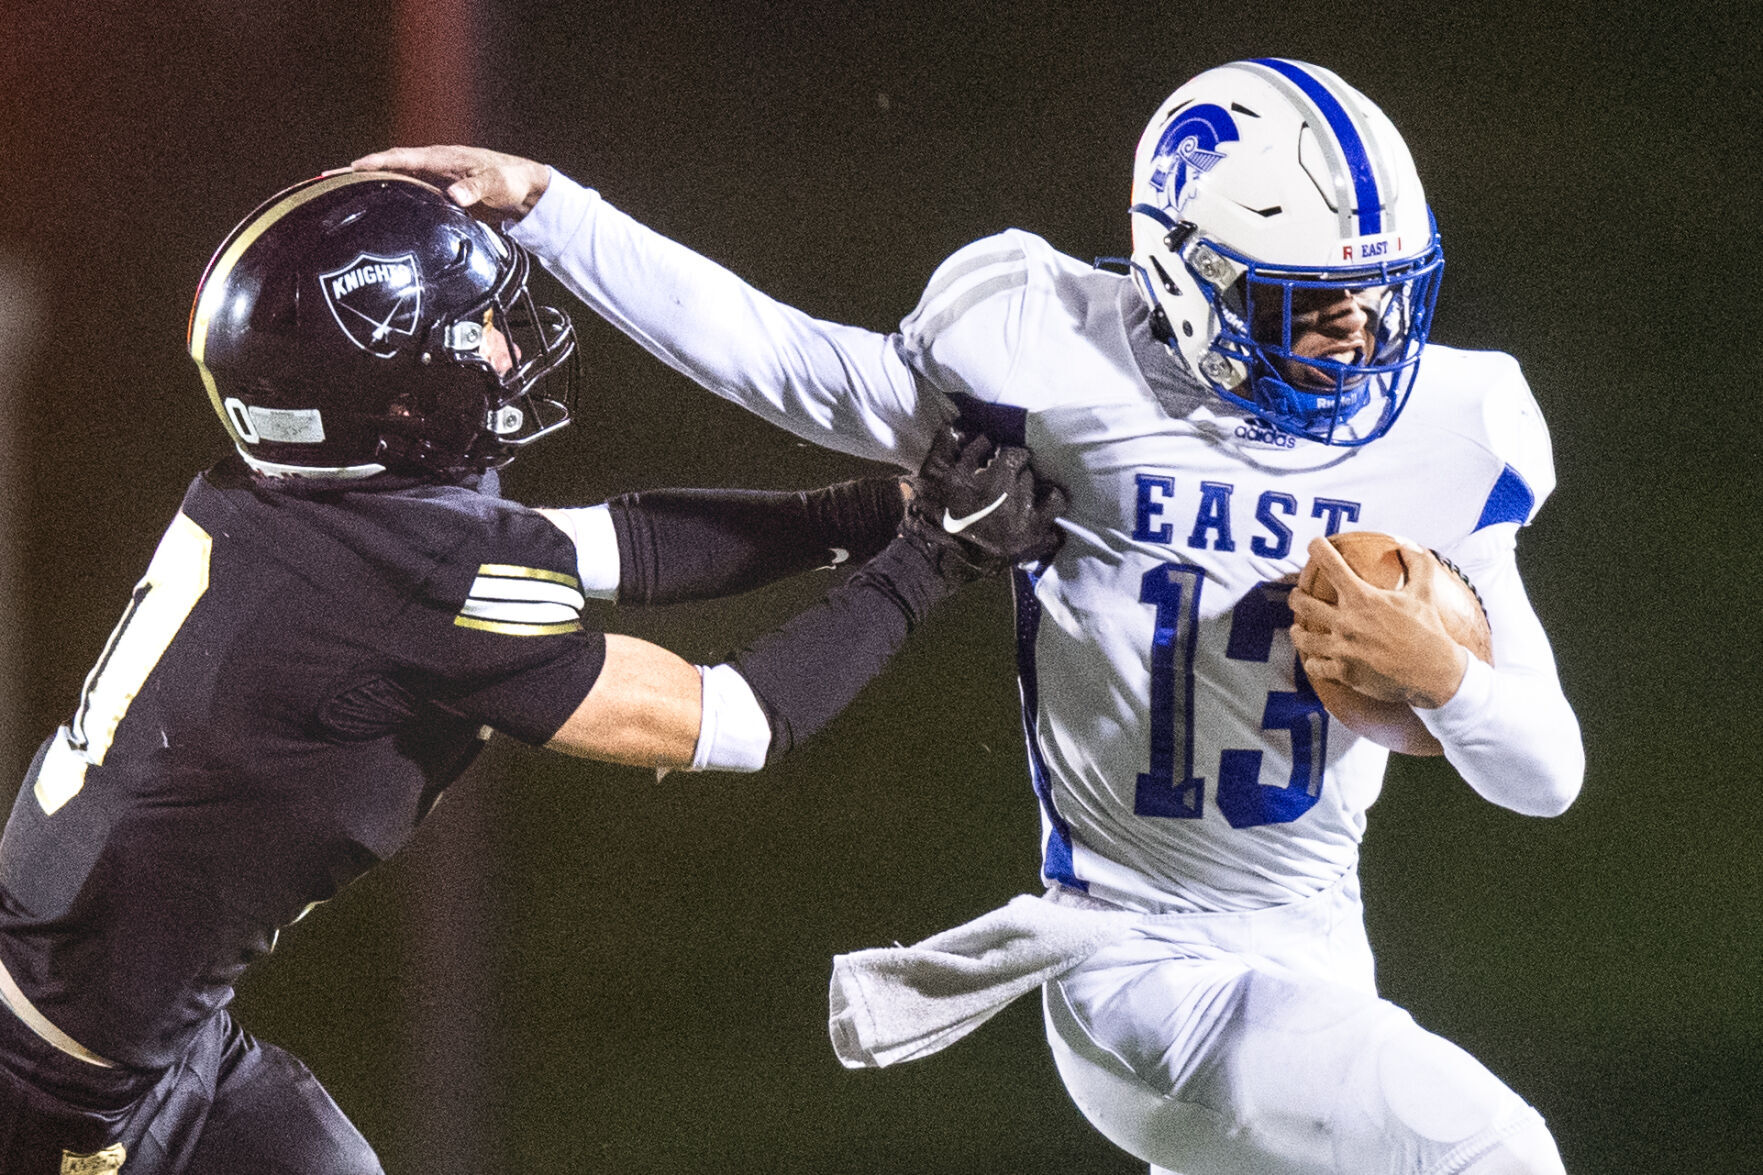 Class A Football Playoffs Heating Up with Exciting Matchups and Top Players to Watch